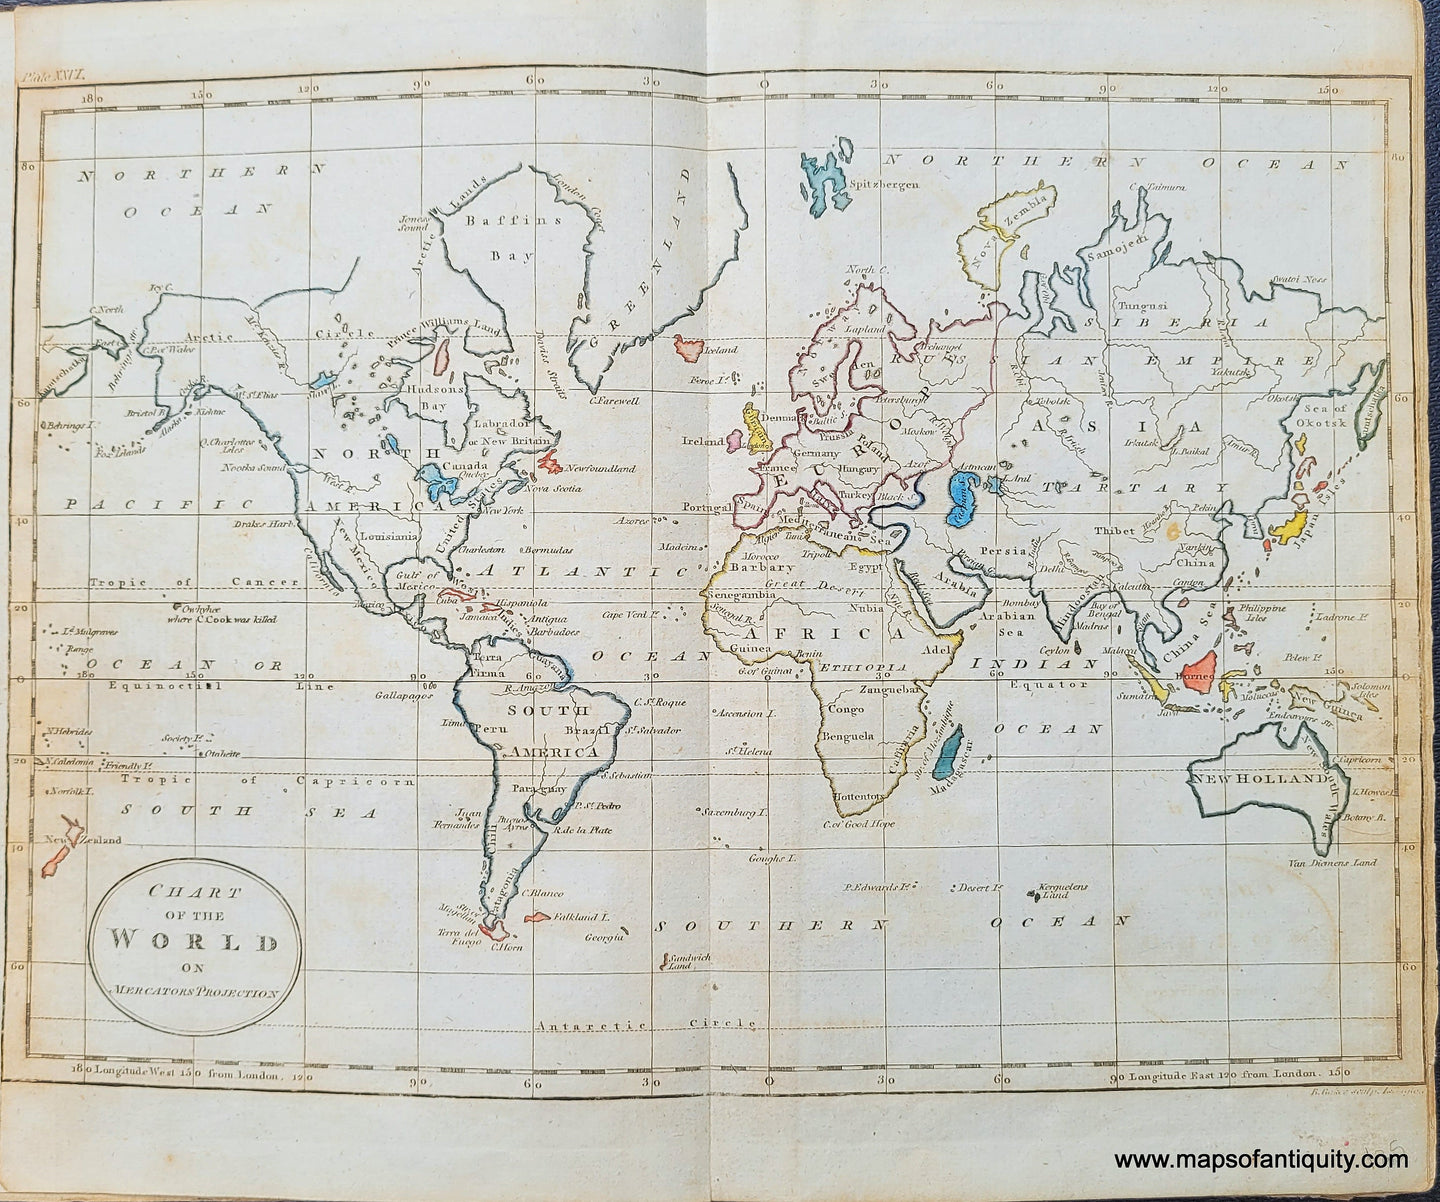 Genuine-Antique-Map-Chart-of-the-World-on-Mercators-Projection-1800-Baker-Guthrie-Maps-Of-Antiquity